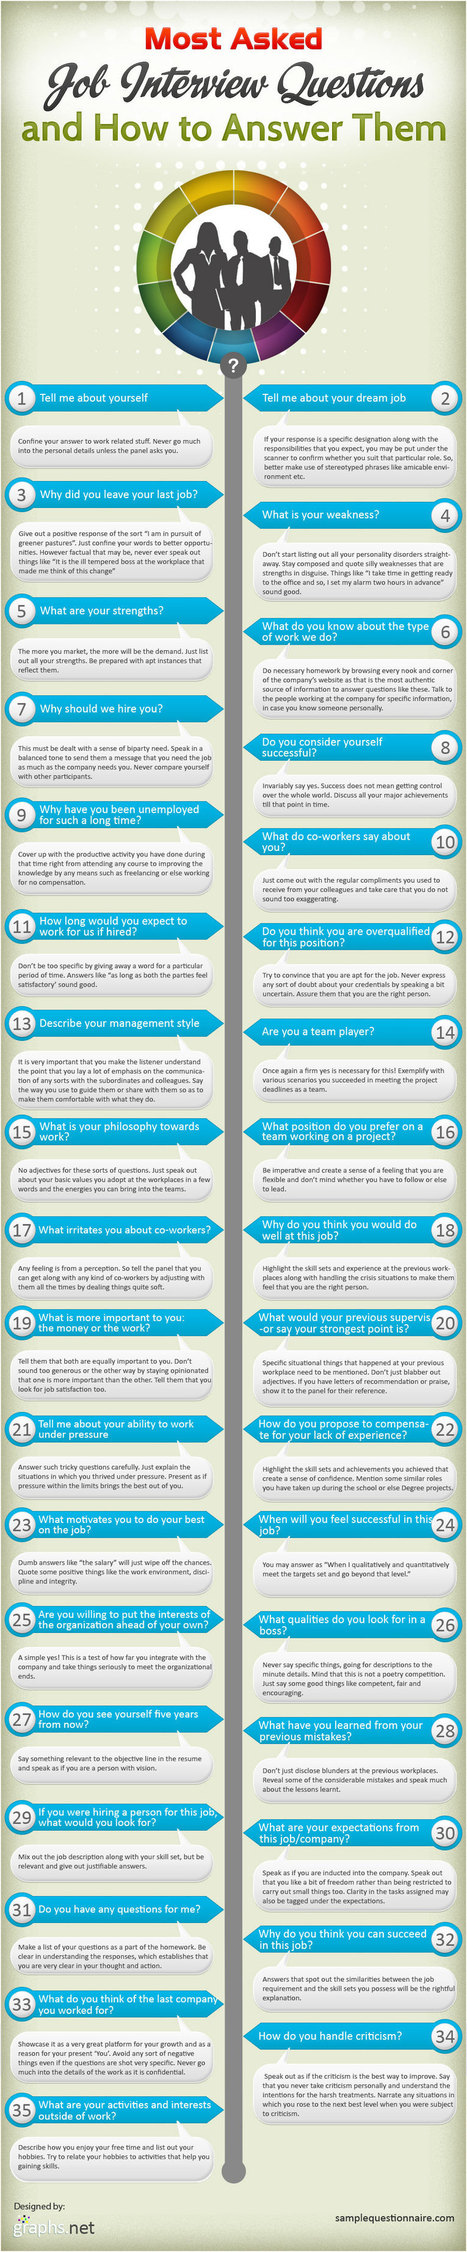 35 Most Asked Job Interview Questions and How to Answer Them | The 21st Century | Scoop.it